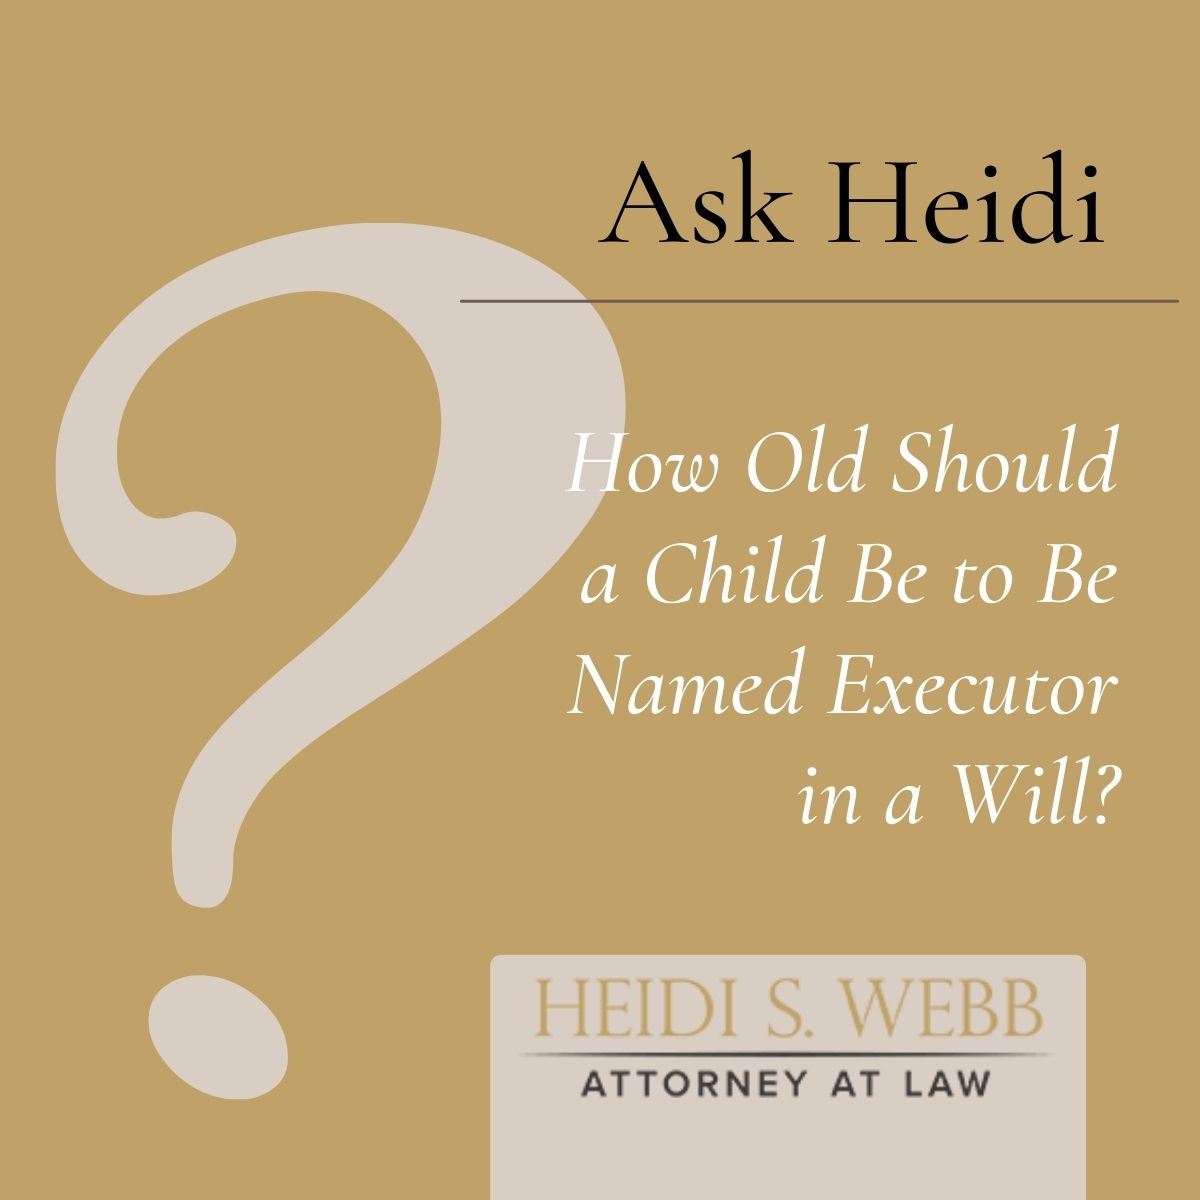 How Old Should a Child Be to Be Named Executor in a Will